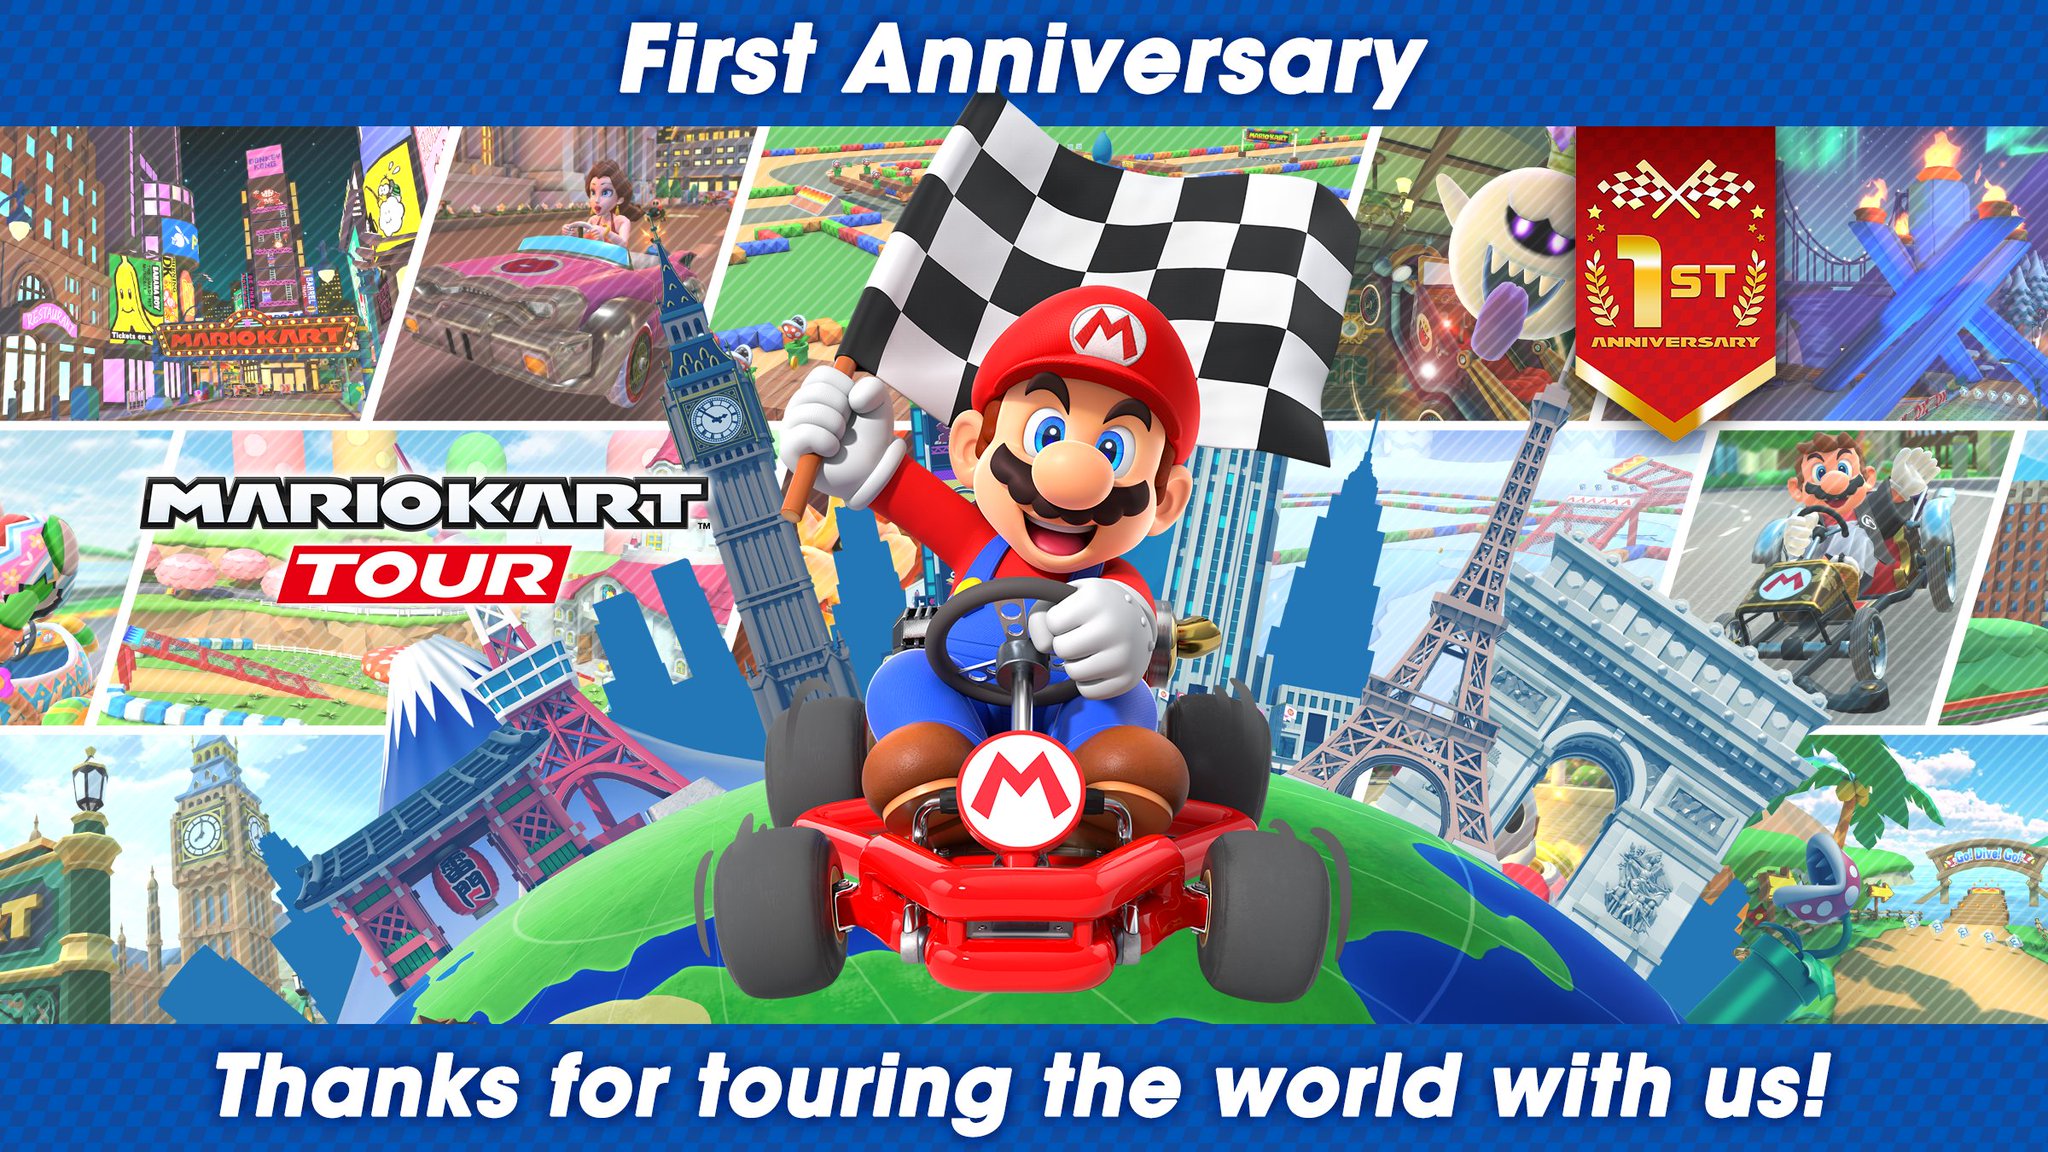 Mario Kart Tour on X: In combination with the Japanese Twitter account,  the #MarioKartTour retweet campaign reached a total of 19,143 RTs! This is  over the 10,000 coins limit, so we'll add